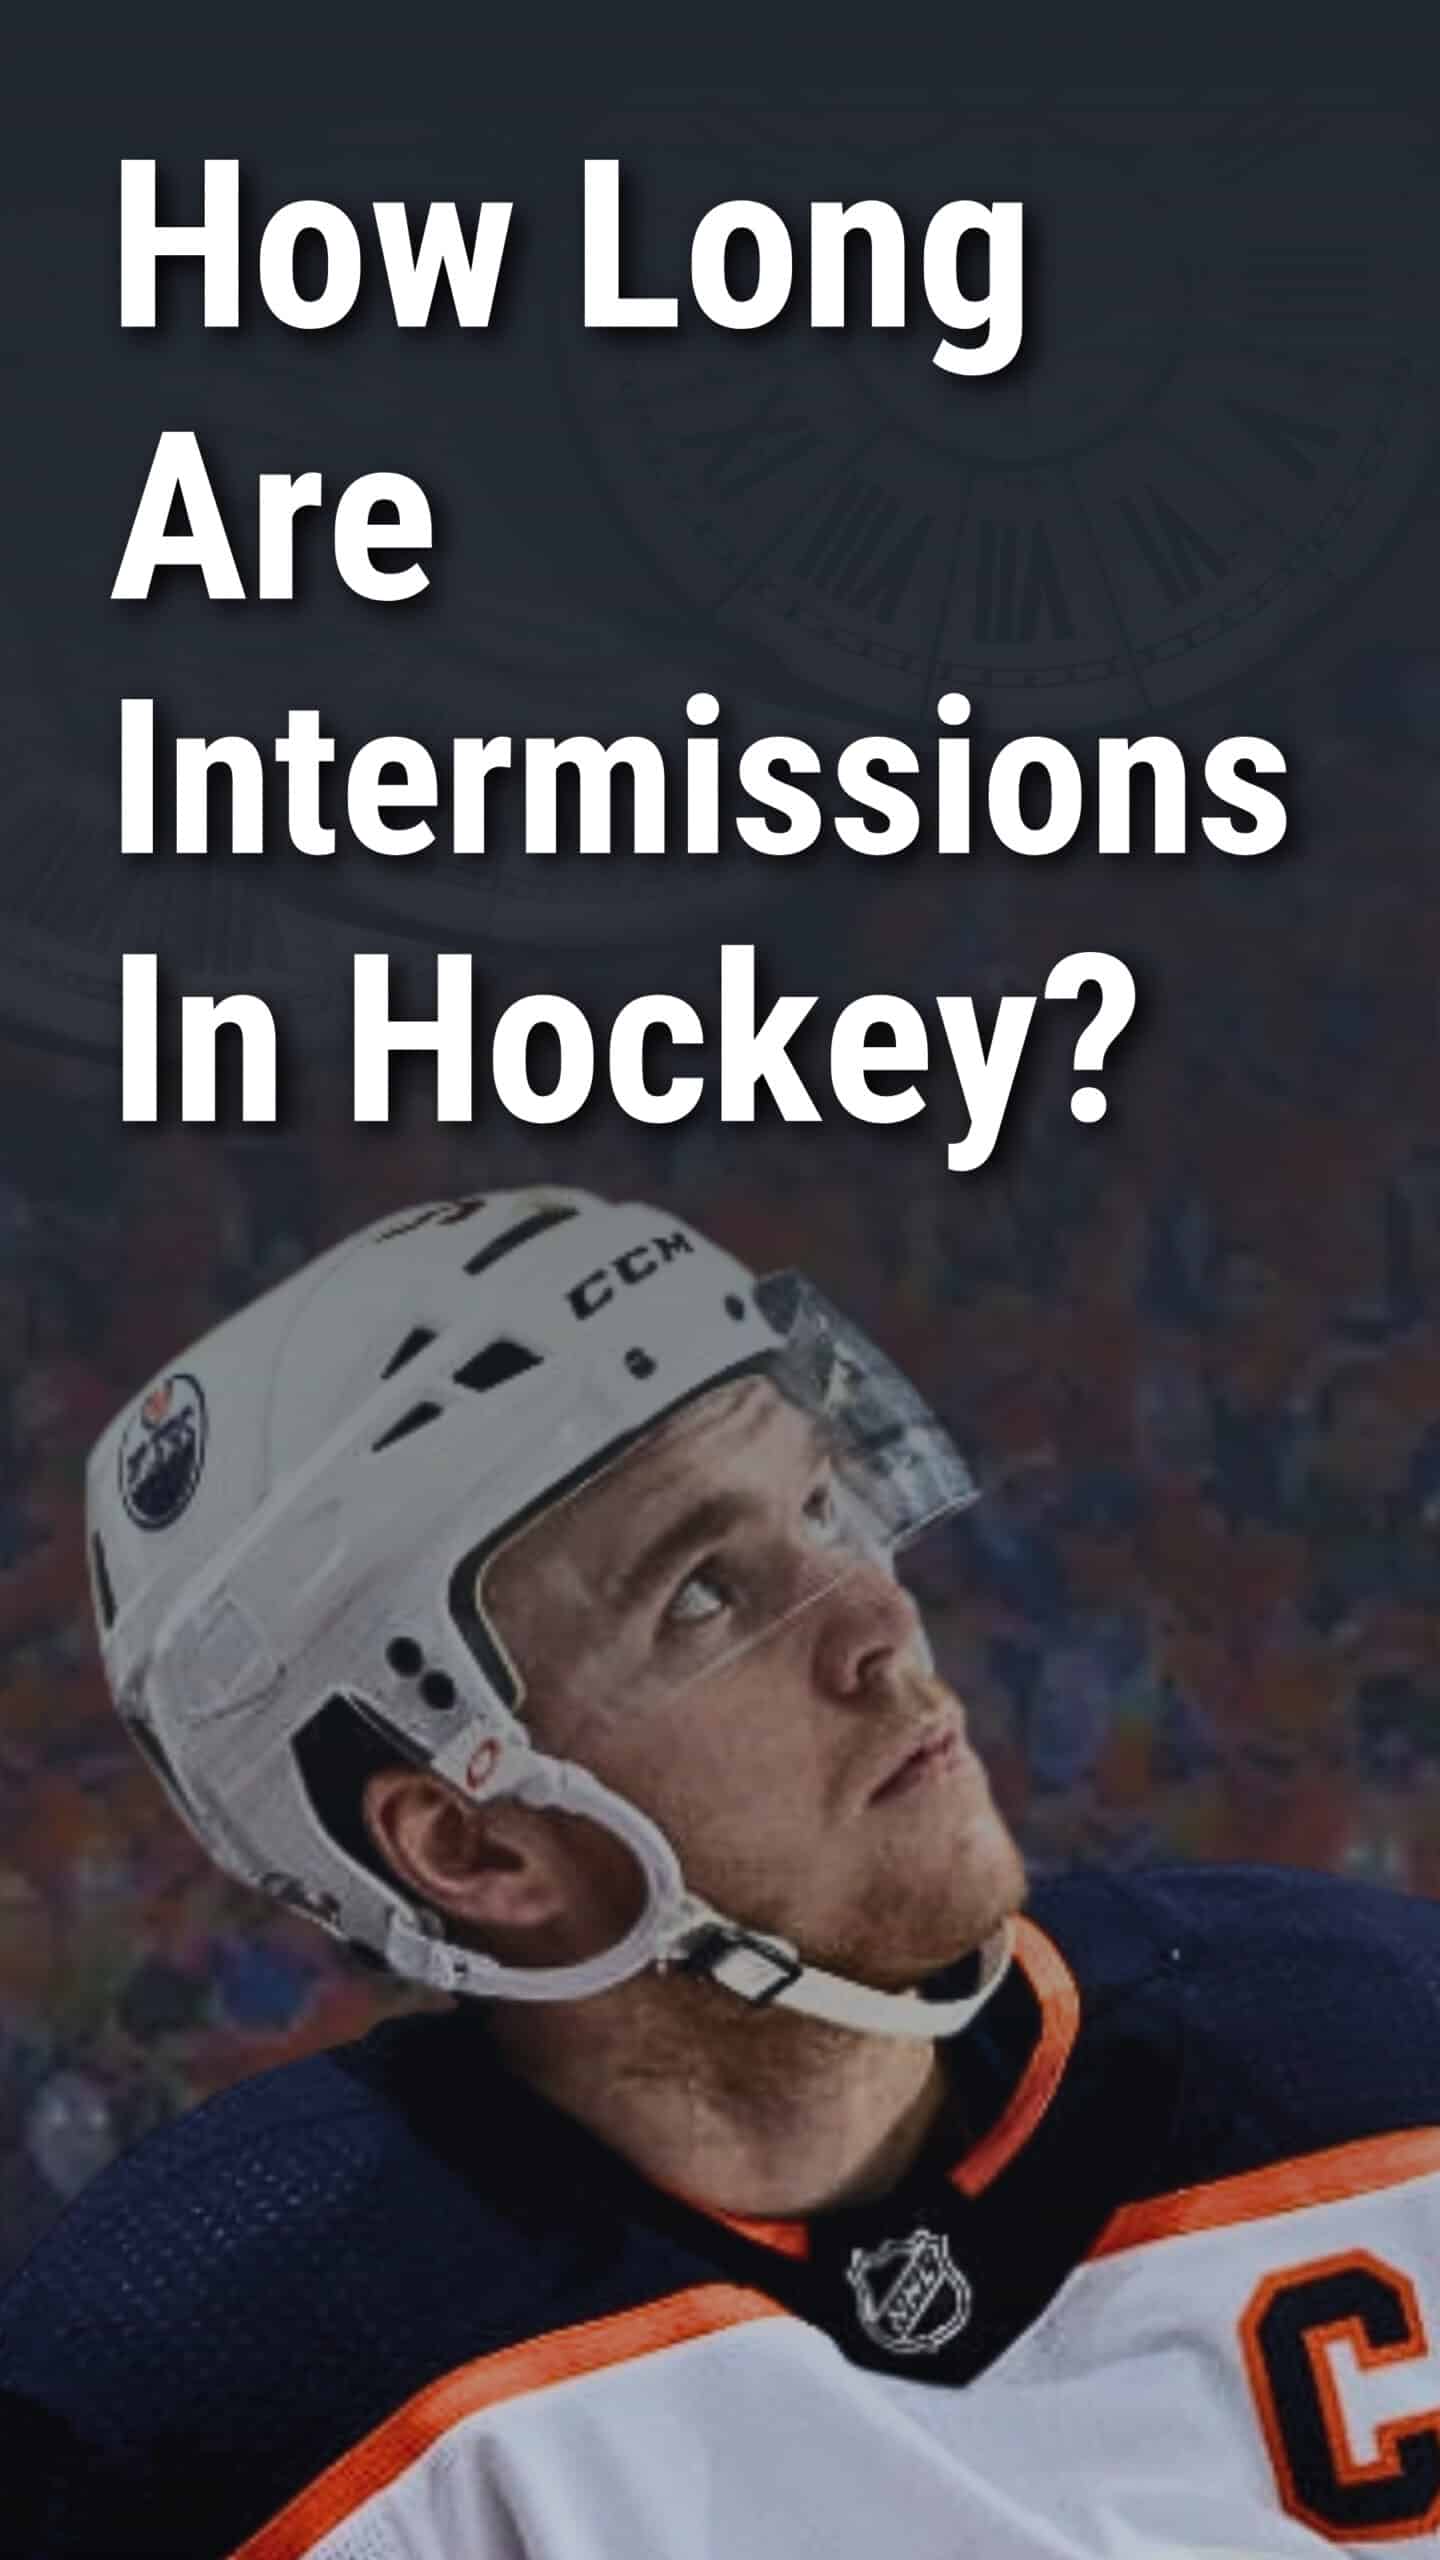 How Long Are Intermissions In Hockey?